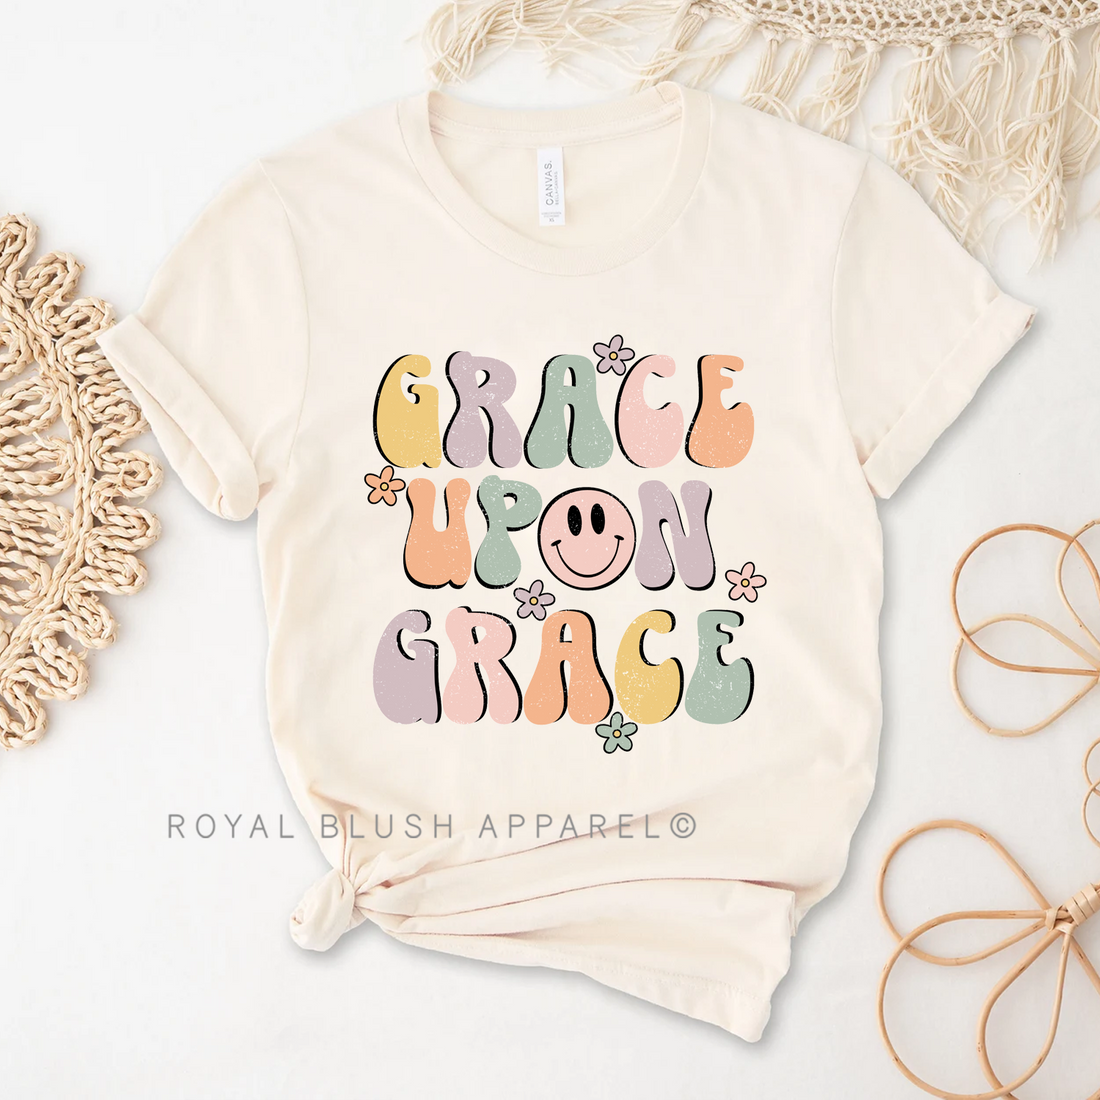 Grace Upon Grace Relaxed Unisex T-shirt